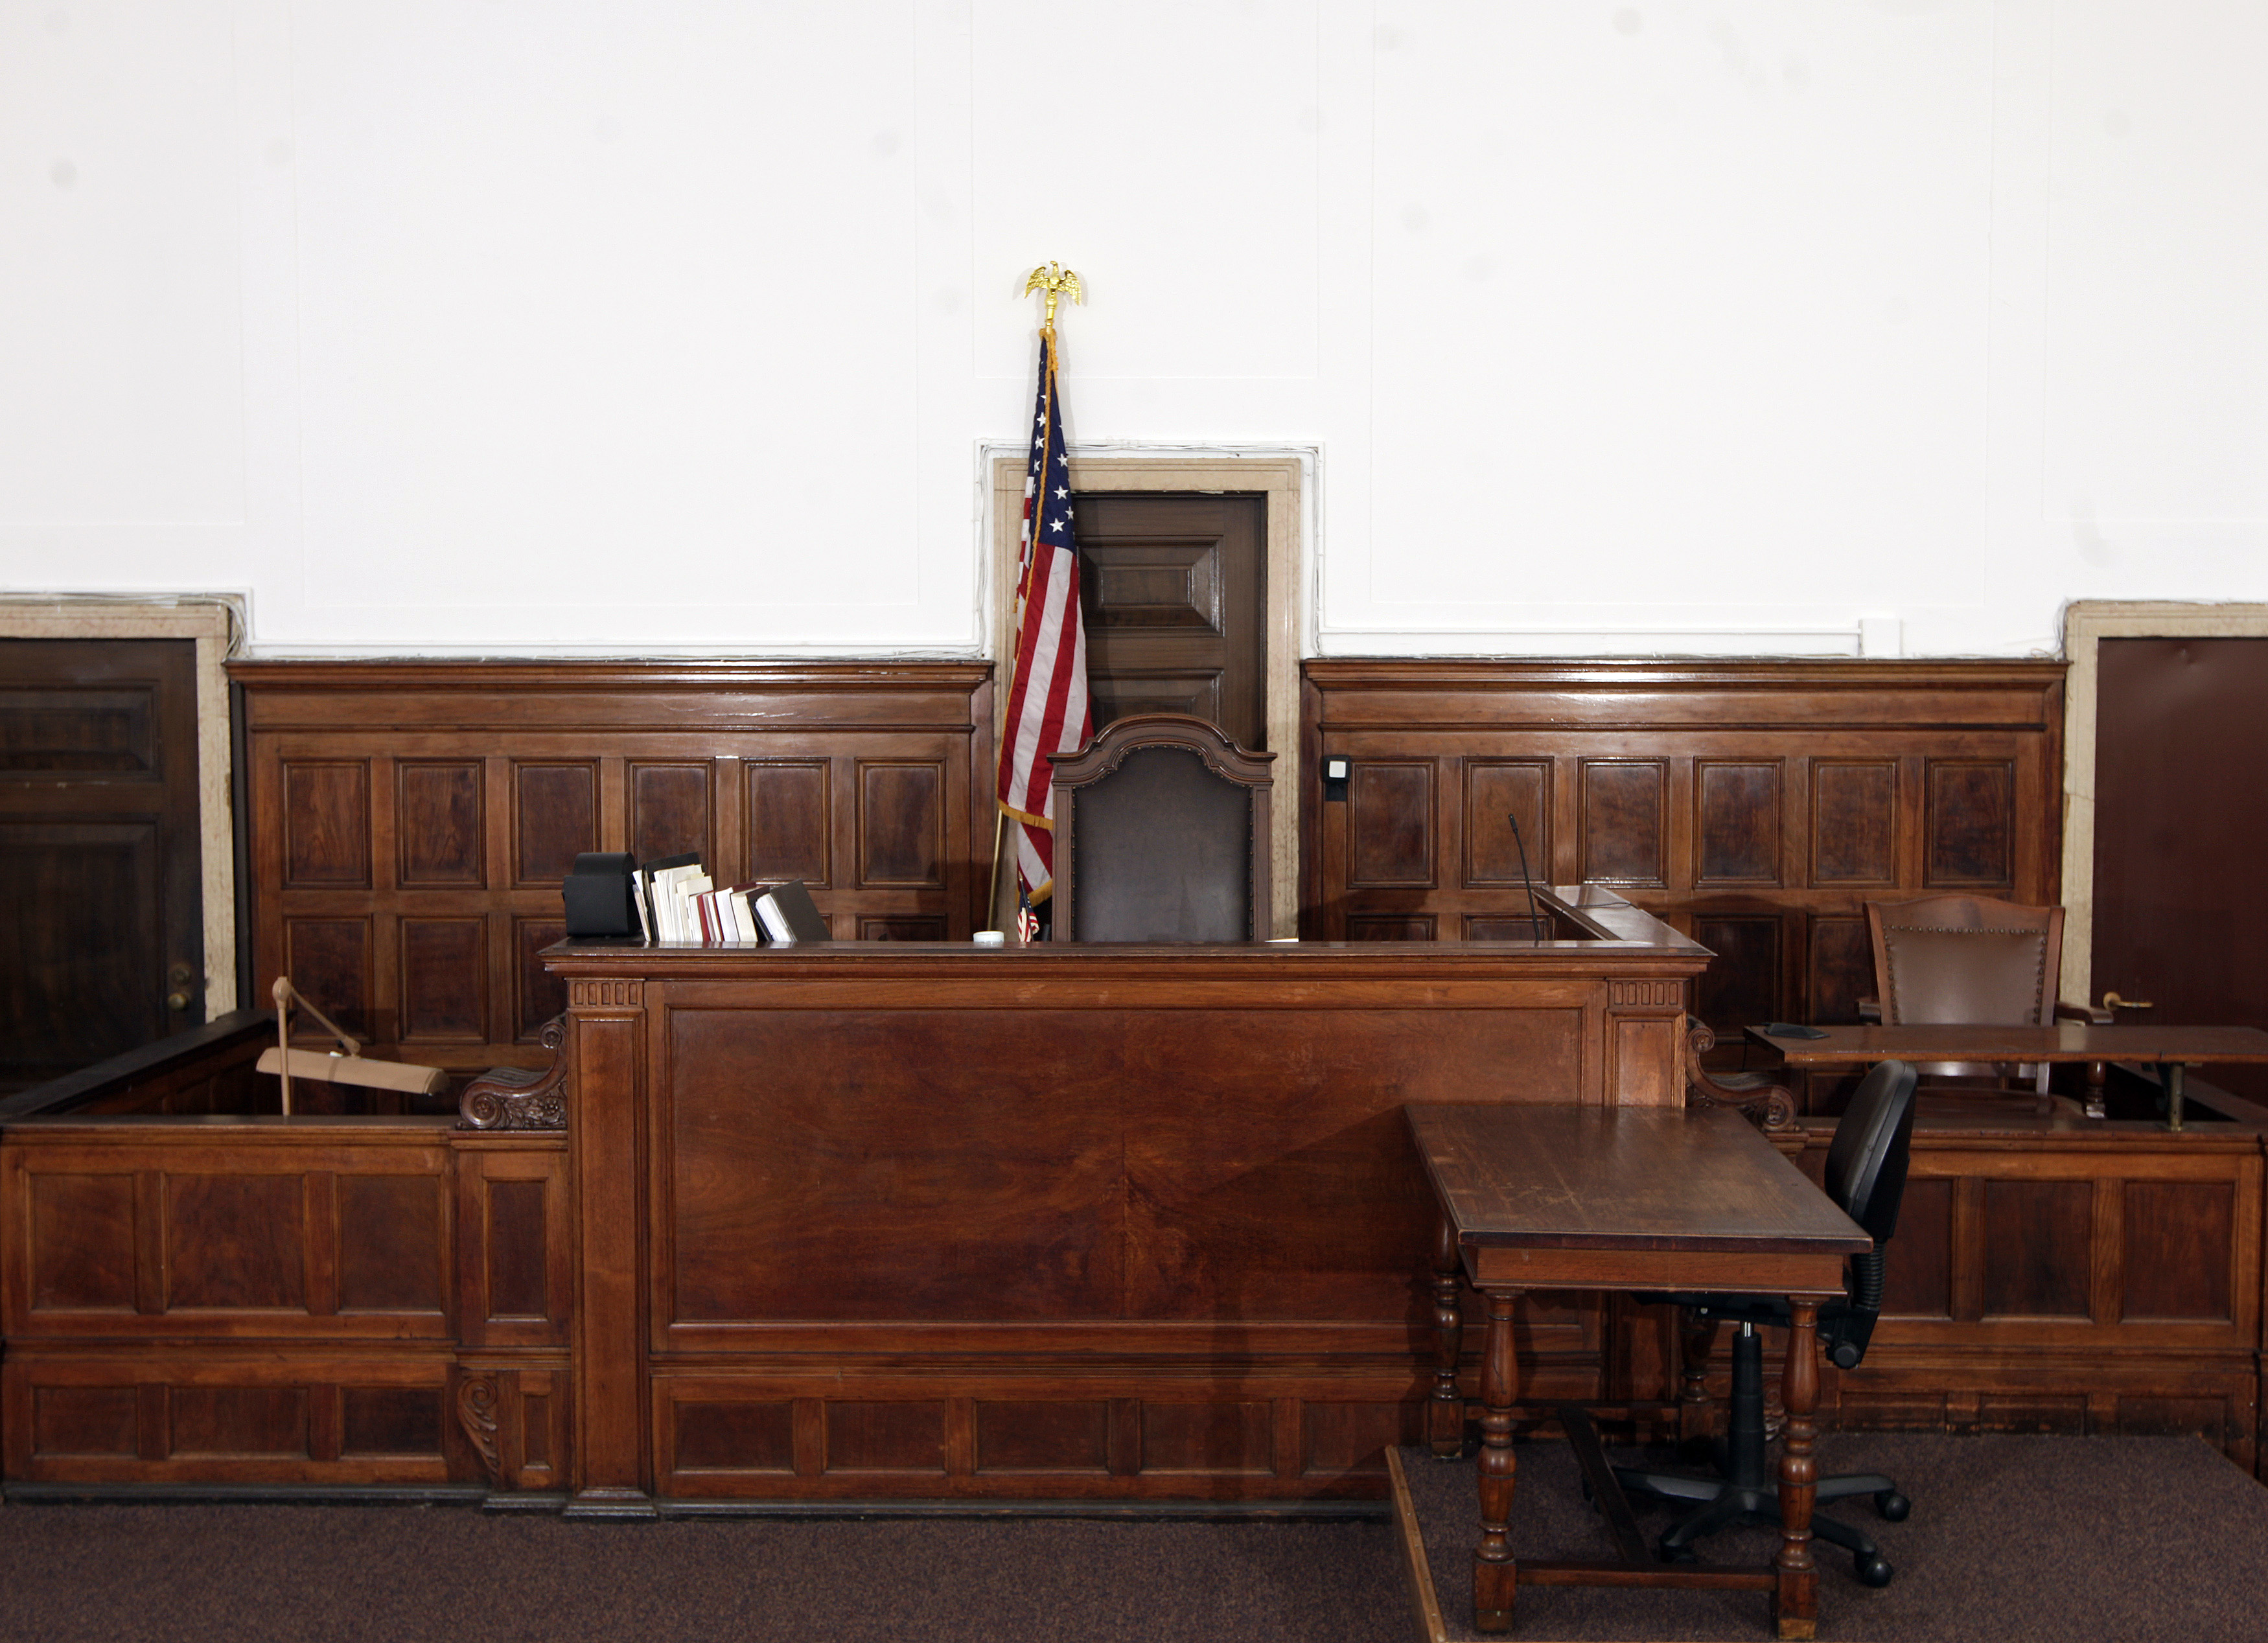 The judge's chair, the witness stand and stenographer's desk are seen.